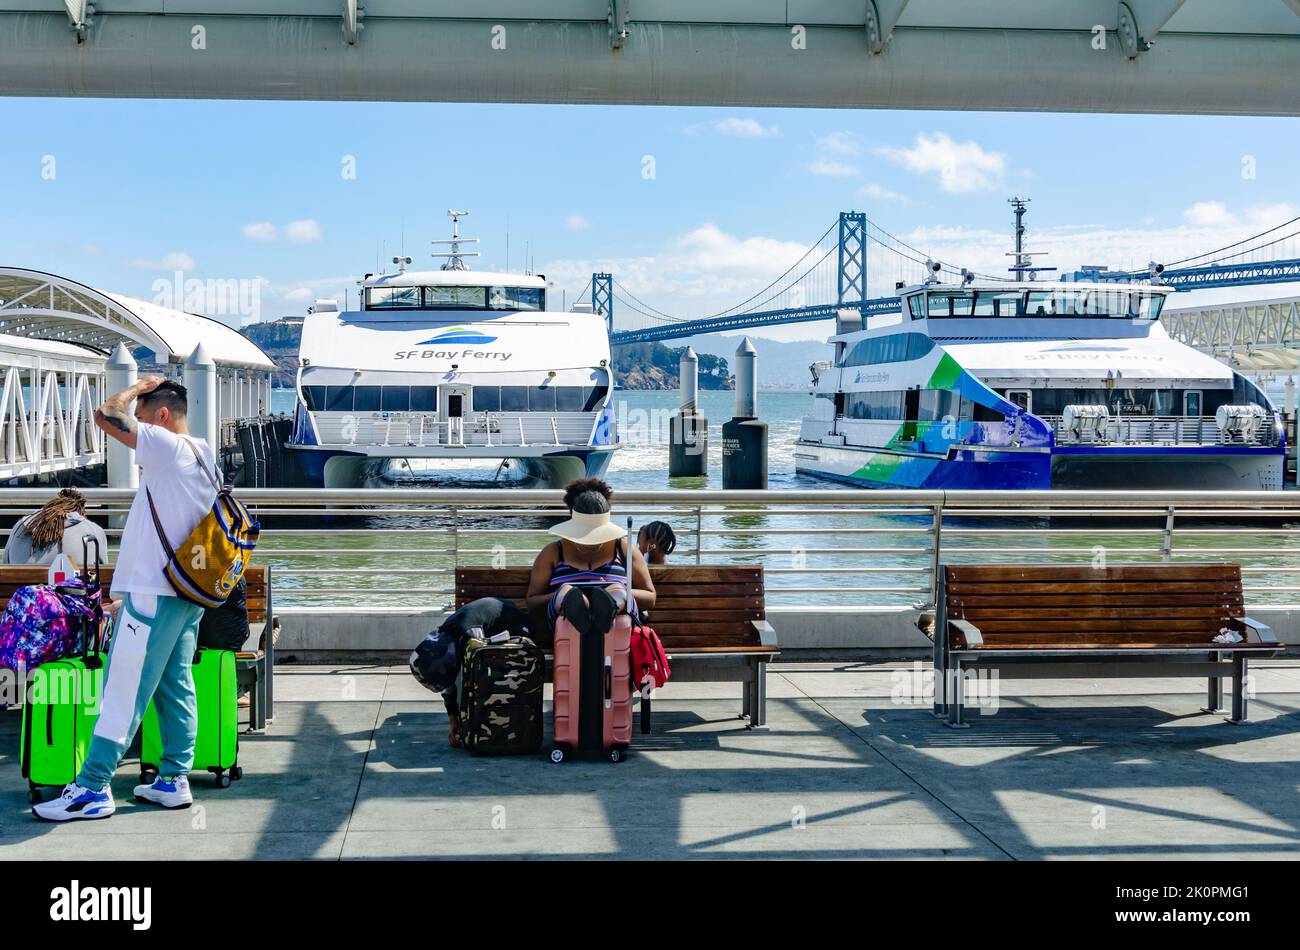 Two San Francisco Bay Ferries moored in the San Francisco Ferry Terminal. Passengers sit and wait on wooden benches. Stock Photo